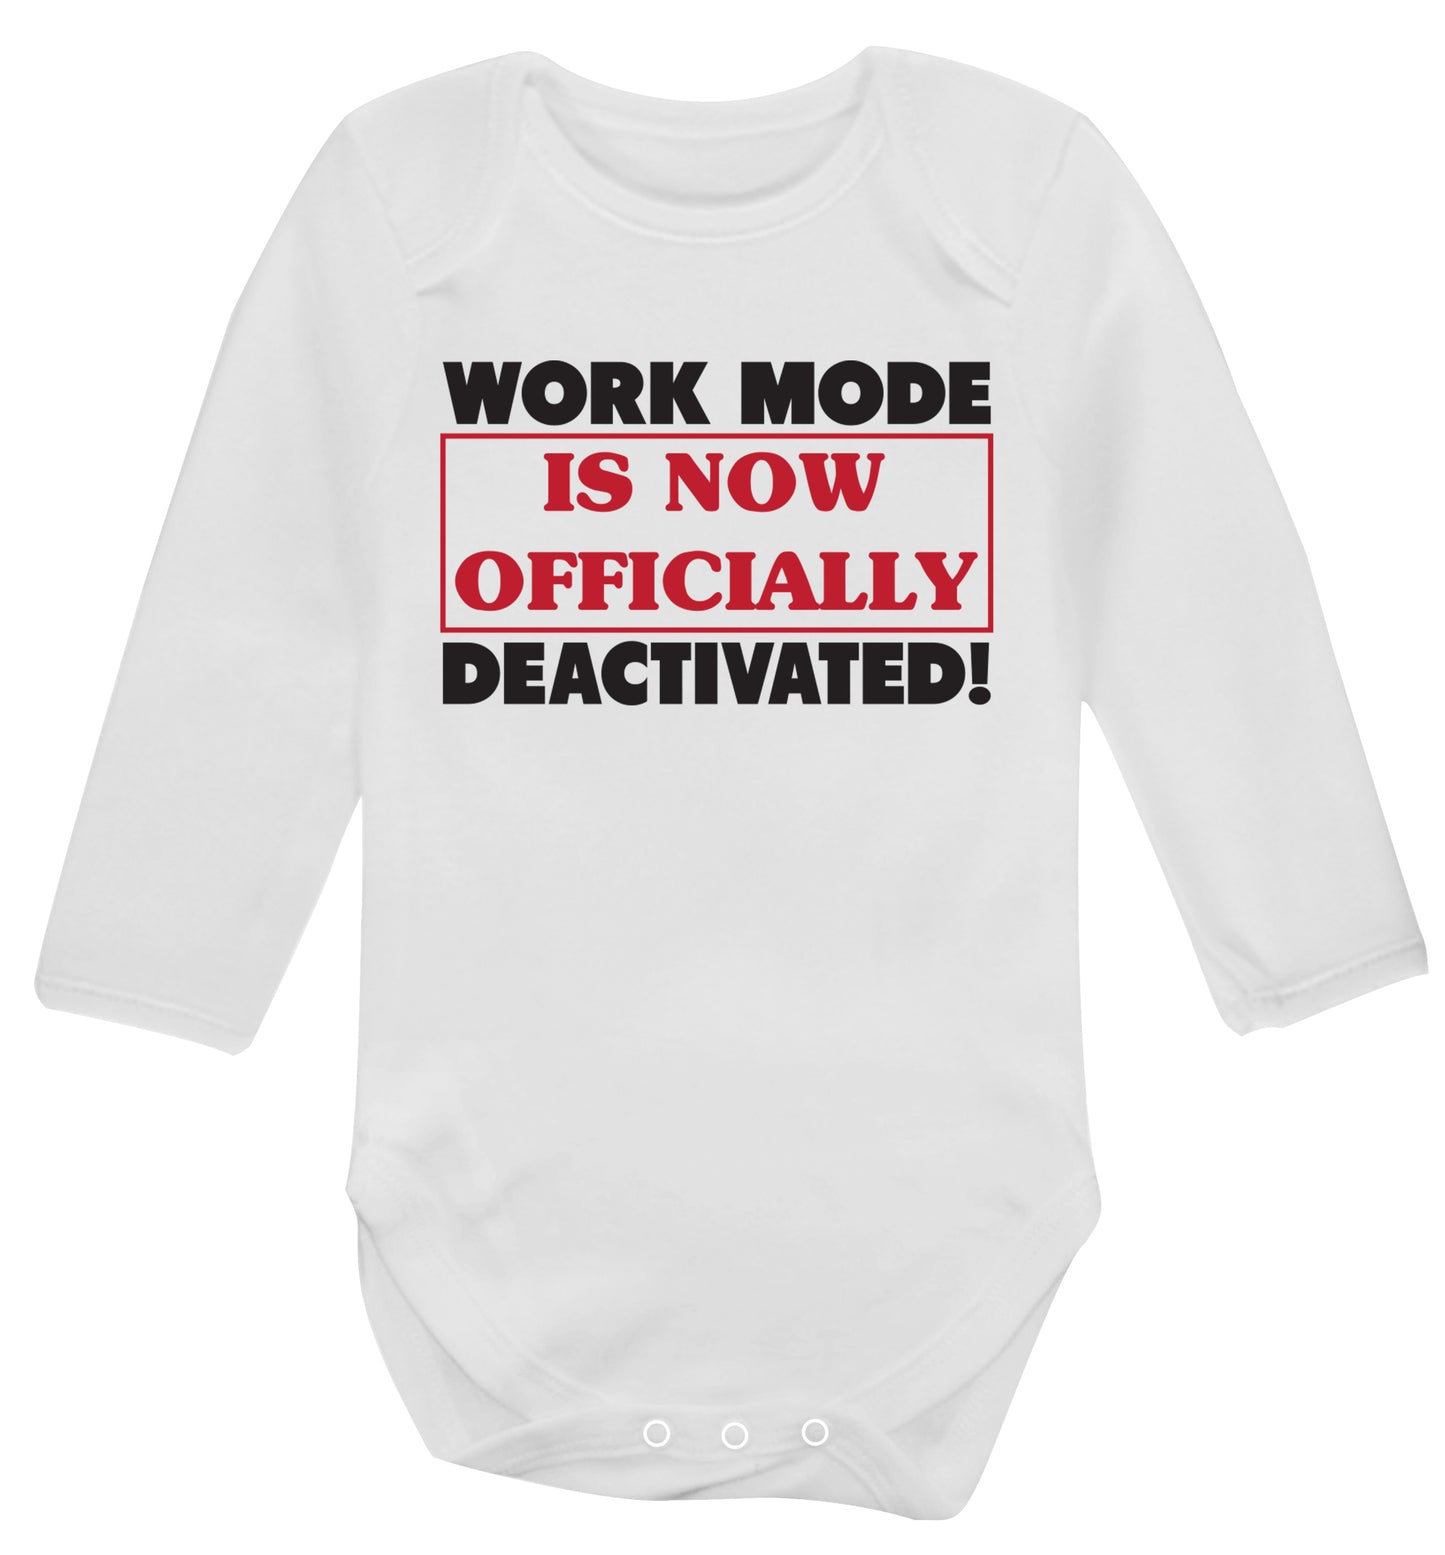 Work mode is now officially deactivated Baby Vest long sleeved white 6-12 months